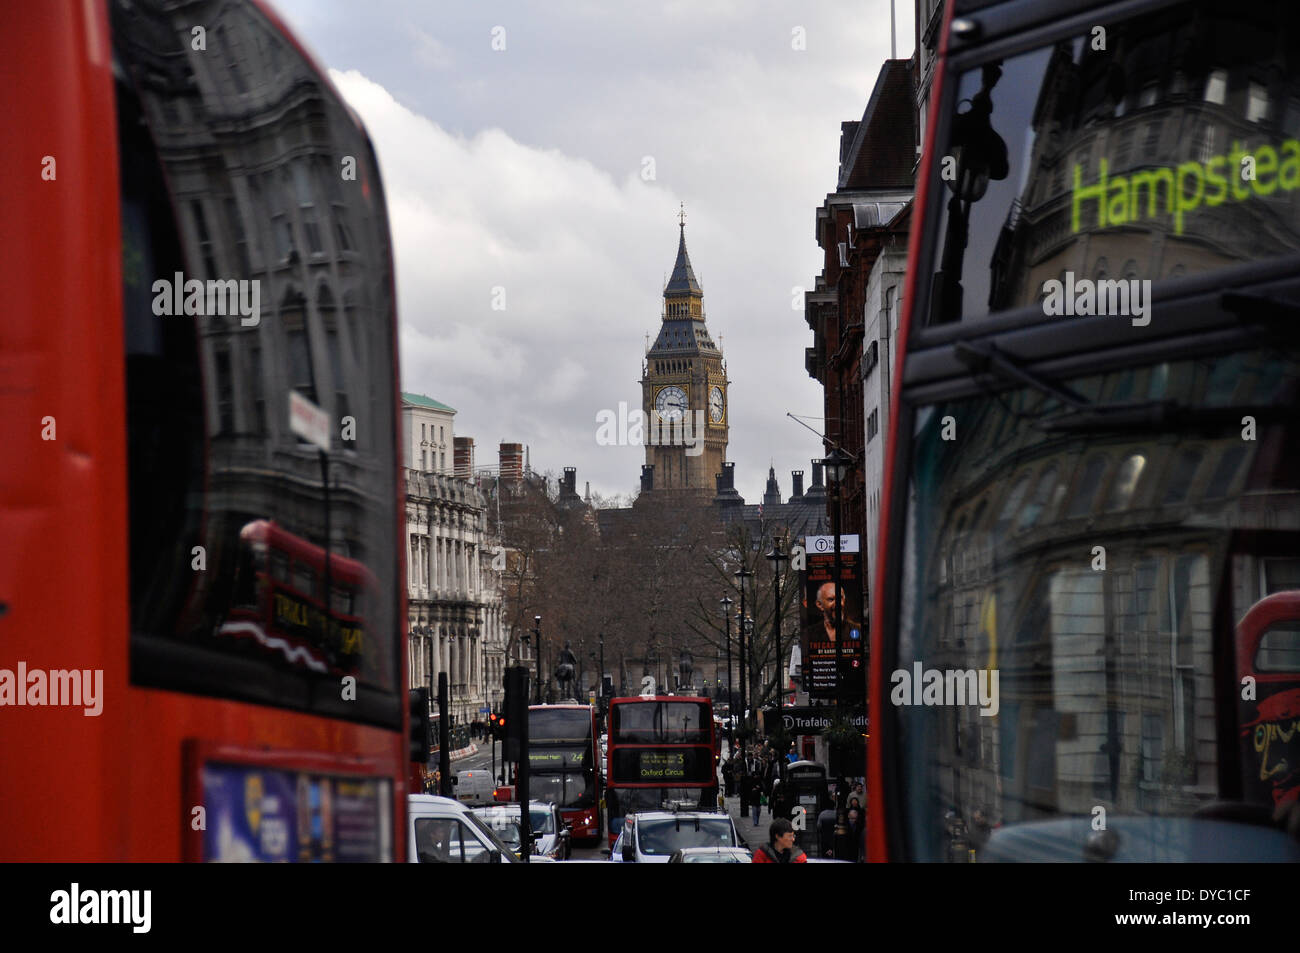 Big Ben between two red buses in London Stock Photo - Alamy